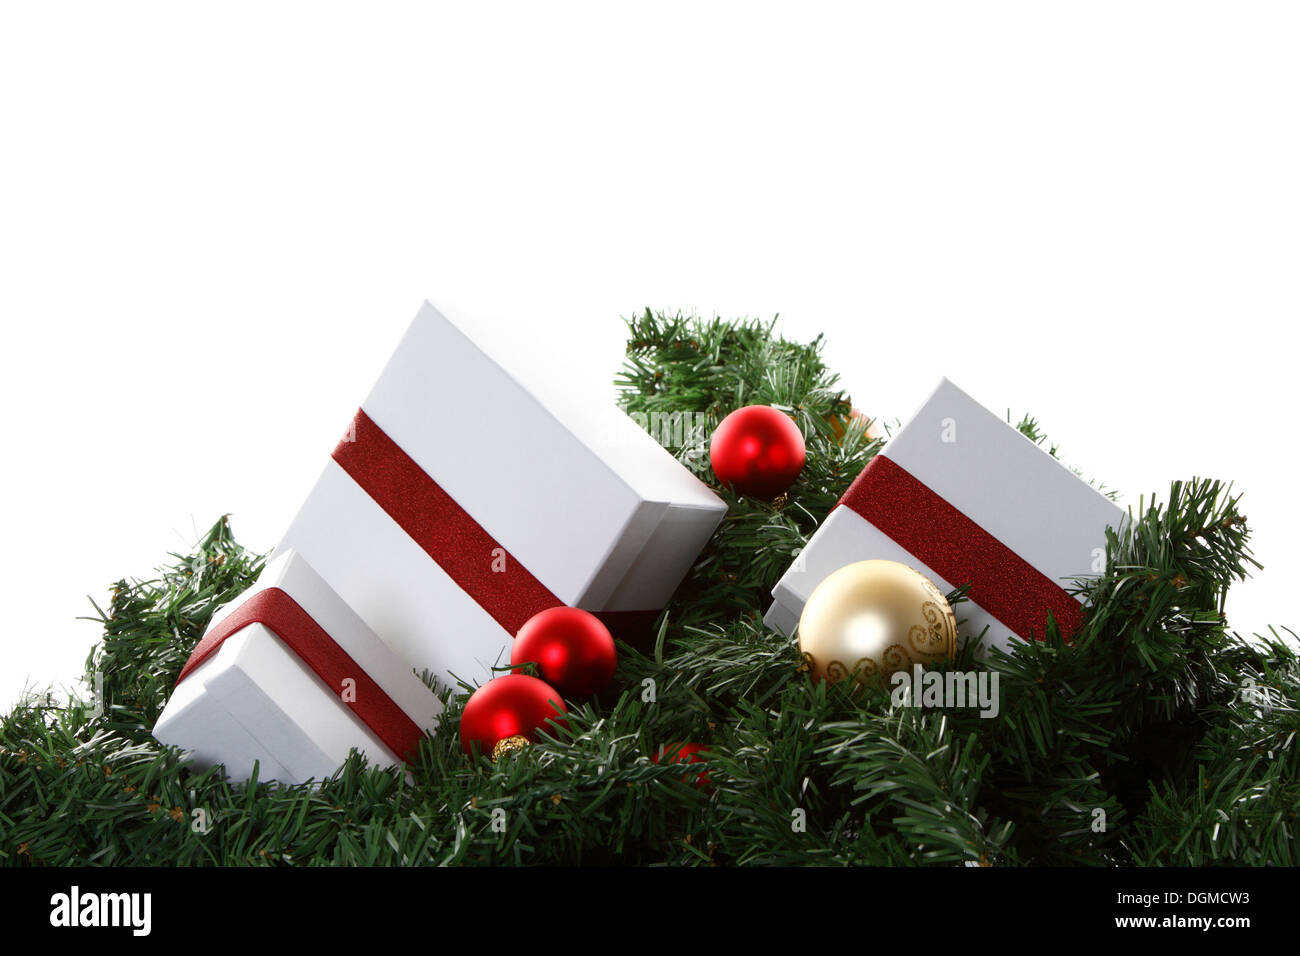 Christmas presents and baubles on artificial fir sprigs Stock Photo